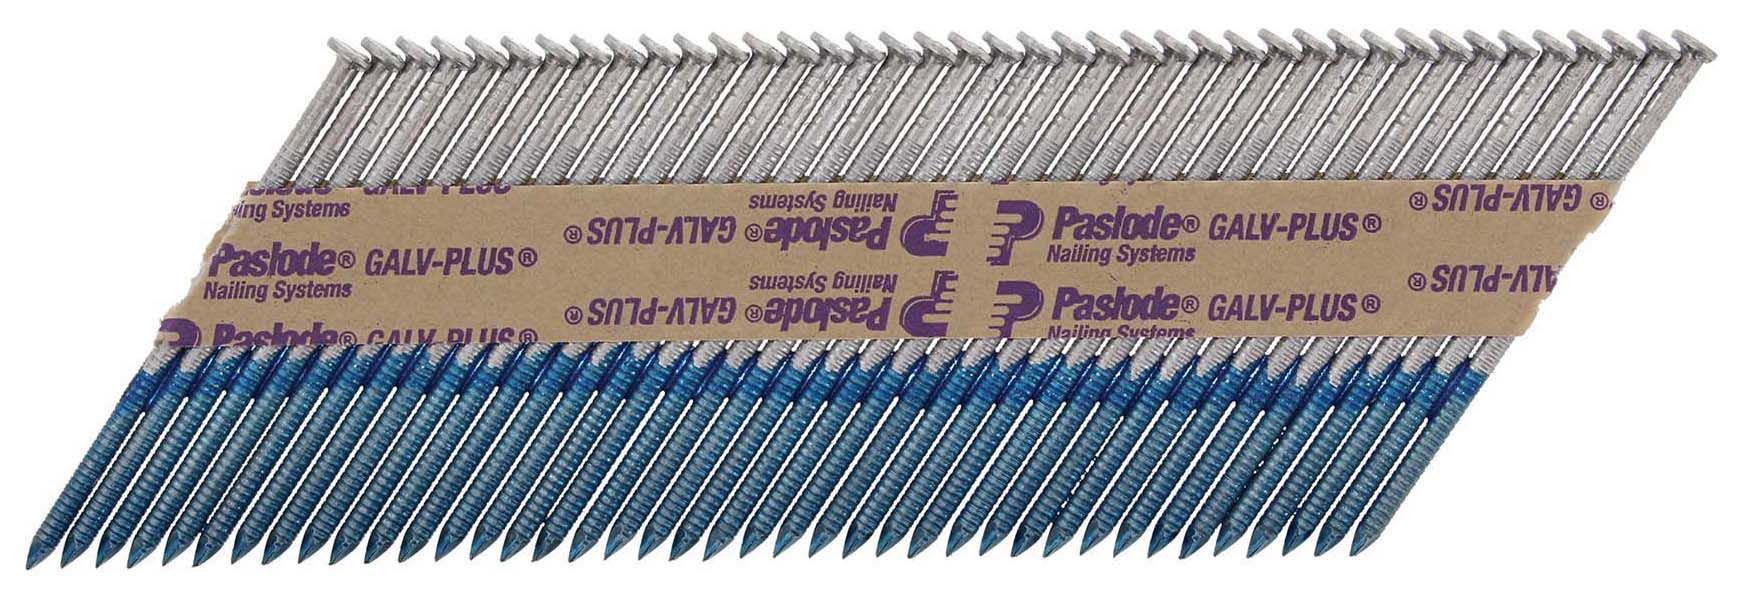 Paslode 360Xi 2.8mm x 51mm Galv-Plus Collated Nails